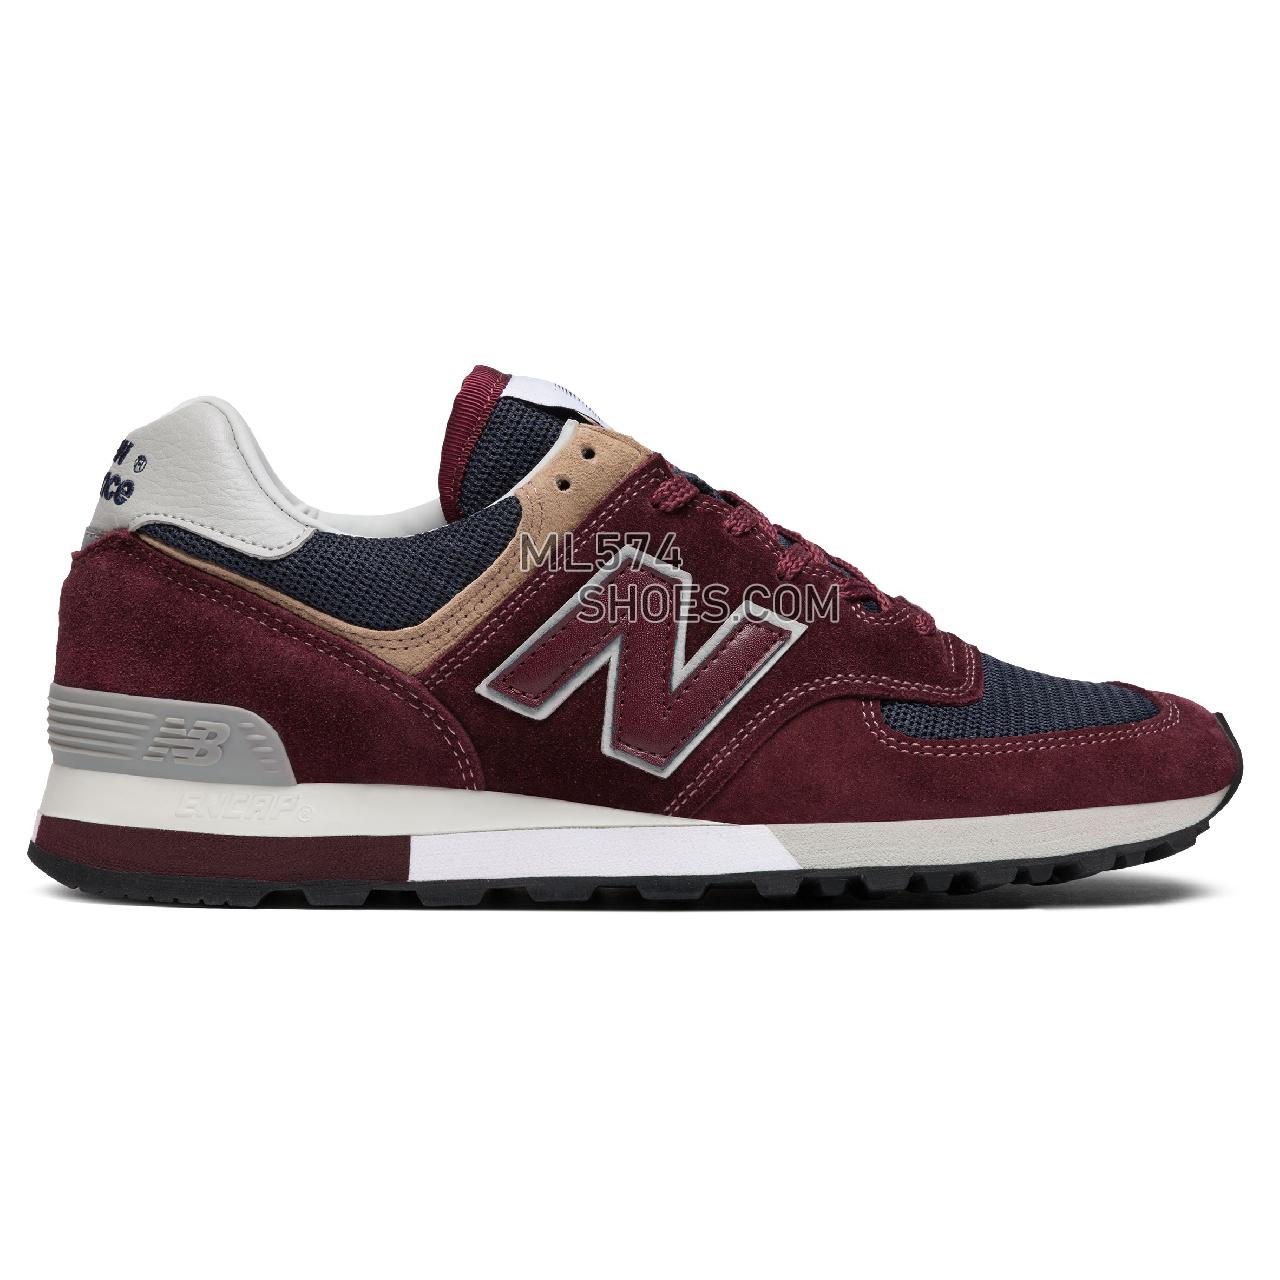 New Balance 576 Made in UK - Men's 576 - Classic Maroon - OM576OBN